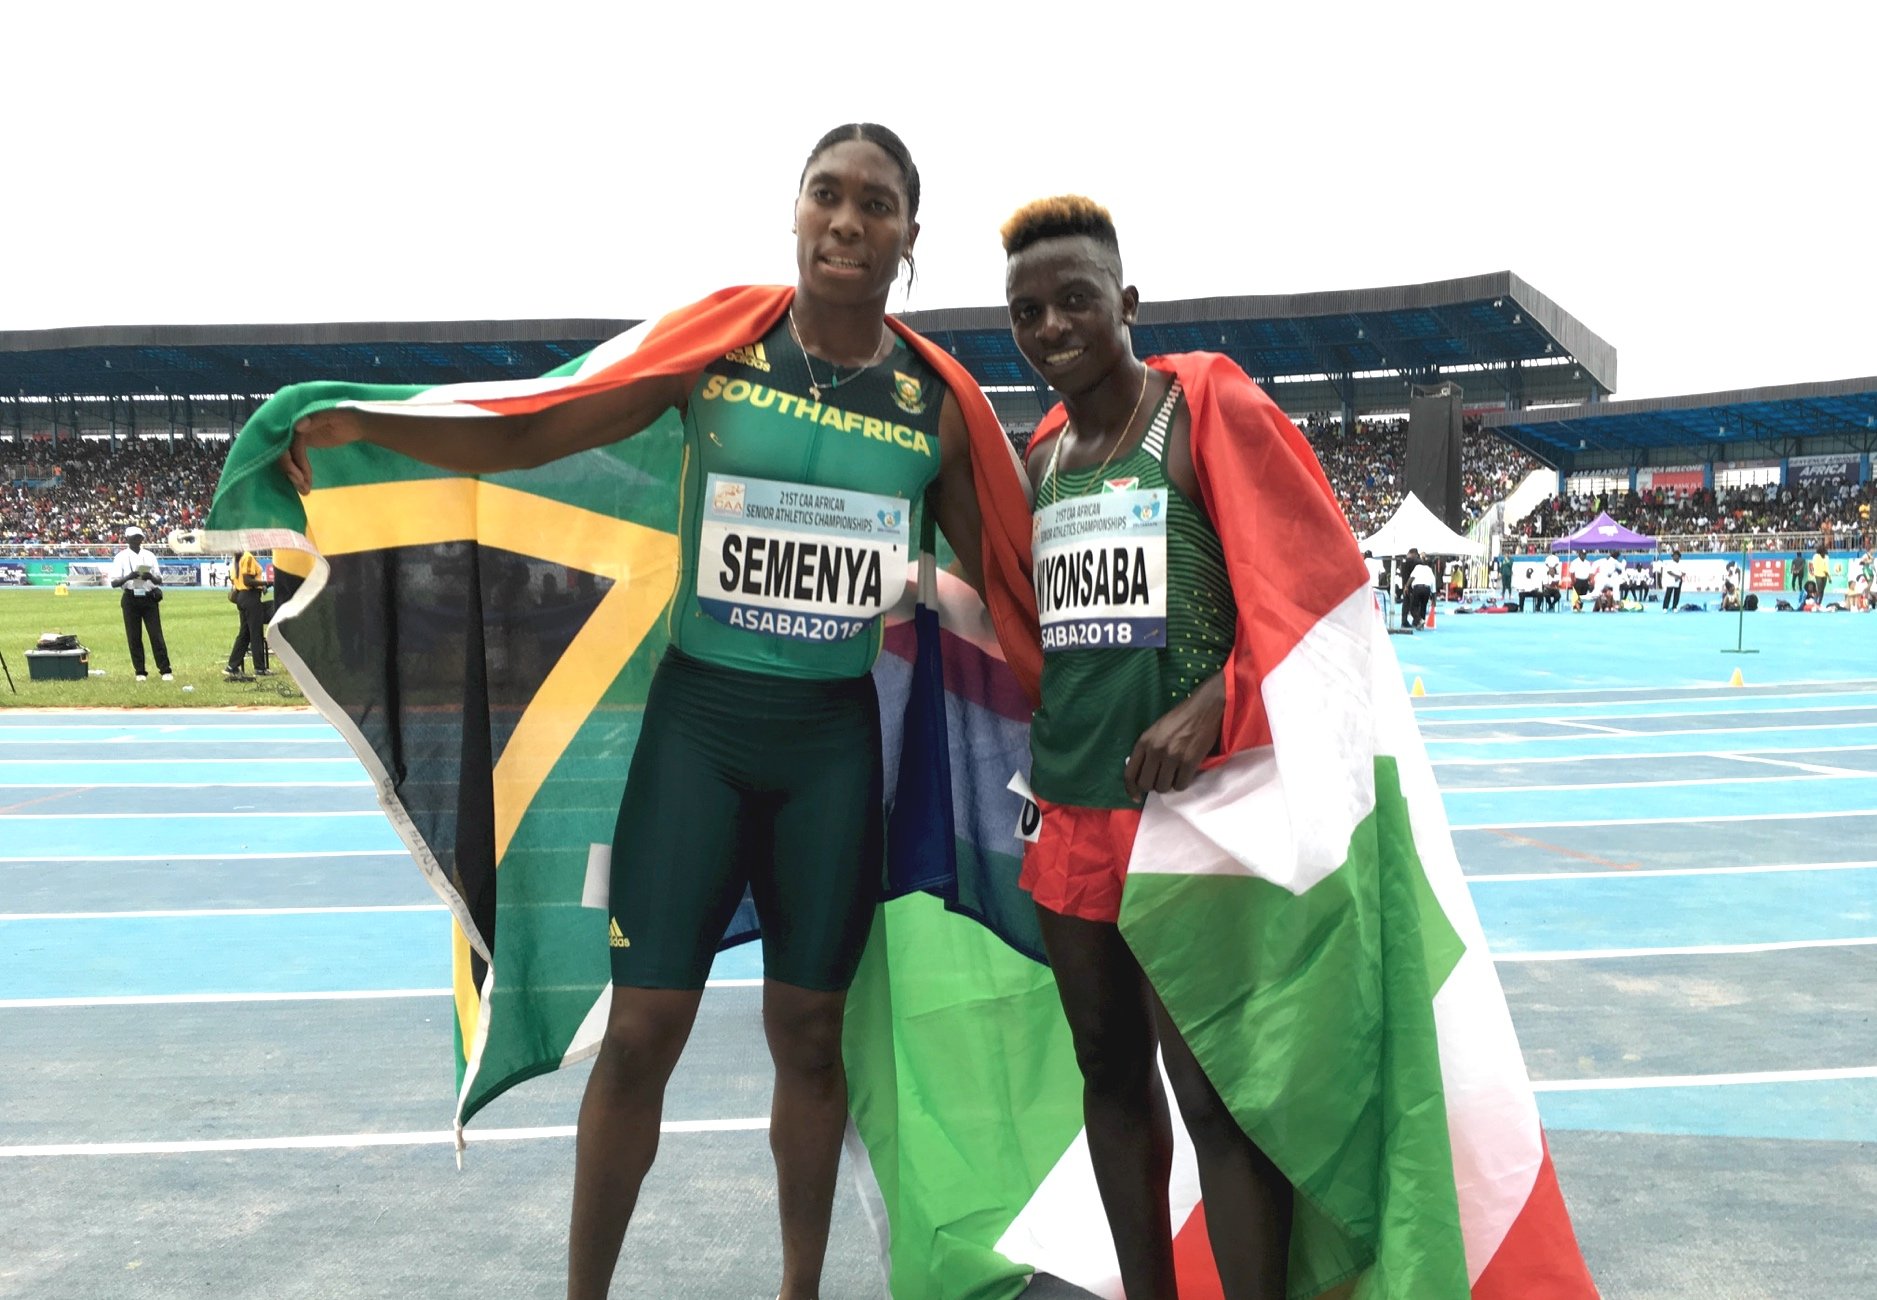 South Africa's Caster Semenya and Francine Burundi after the taking gold and silver in women's 800m at the 2018 African Senior Championships in Asaba / Photo credit: Yomi Omogbeja